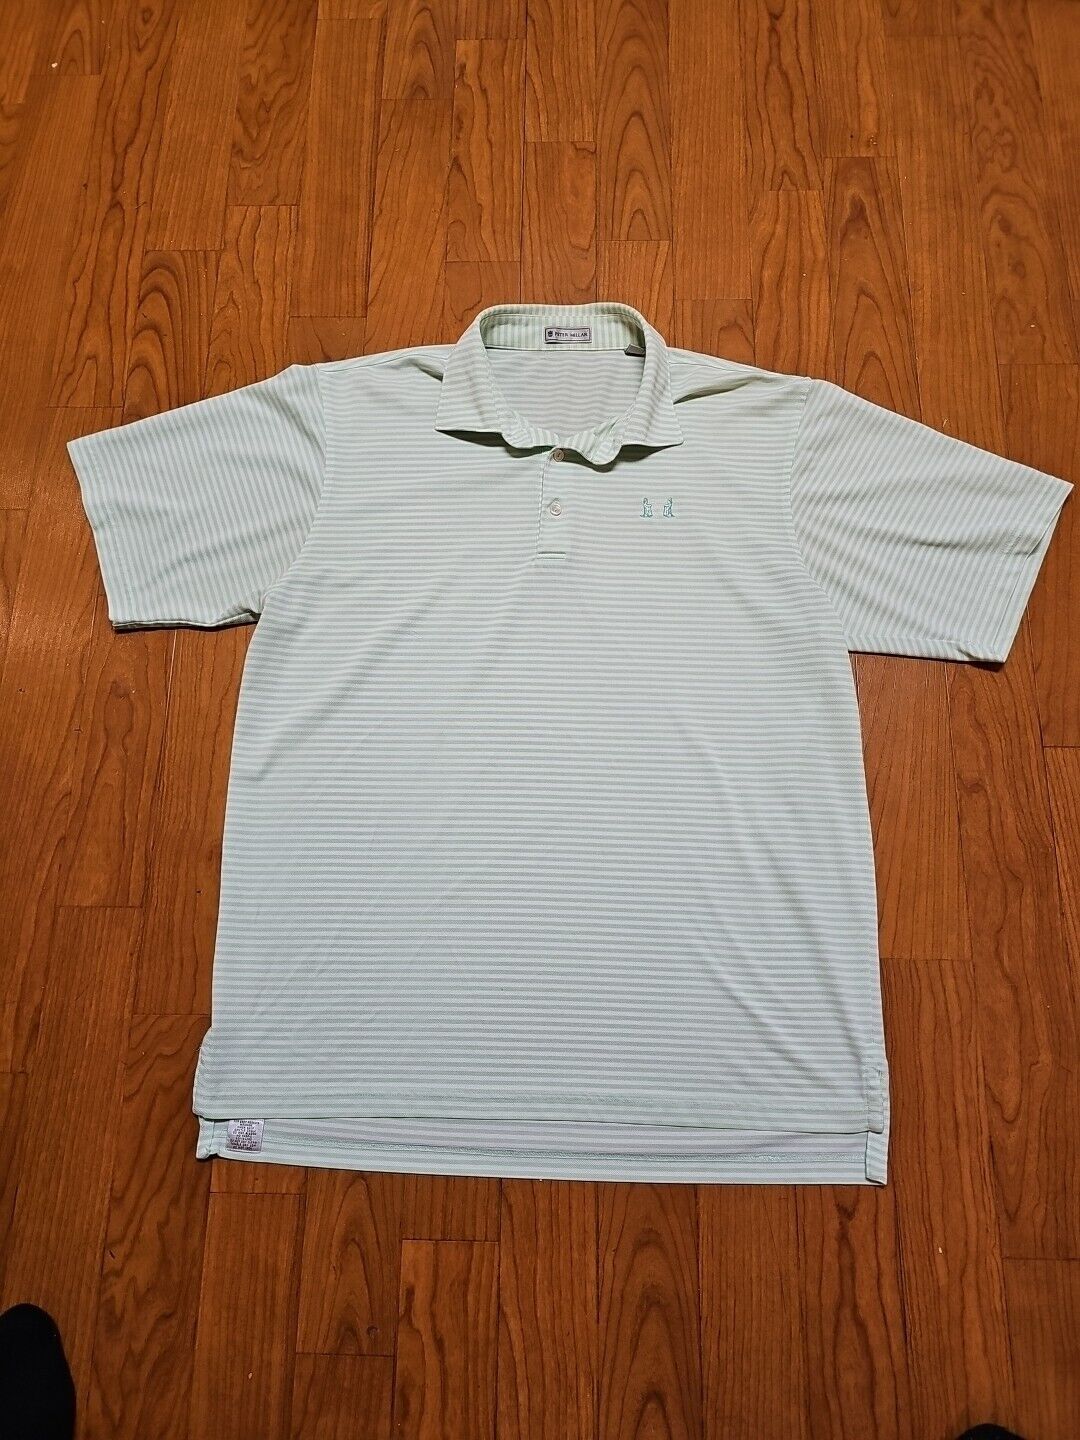 PETER MILLAR GOLF POLO SHIRT Green White Striped XL Collared 100% Polyester 